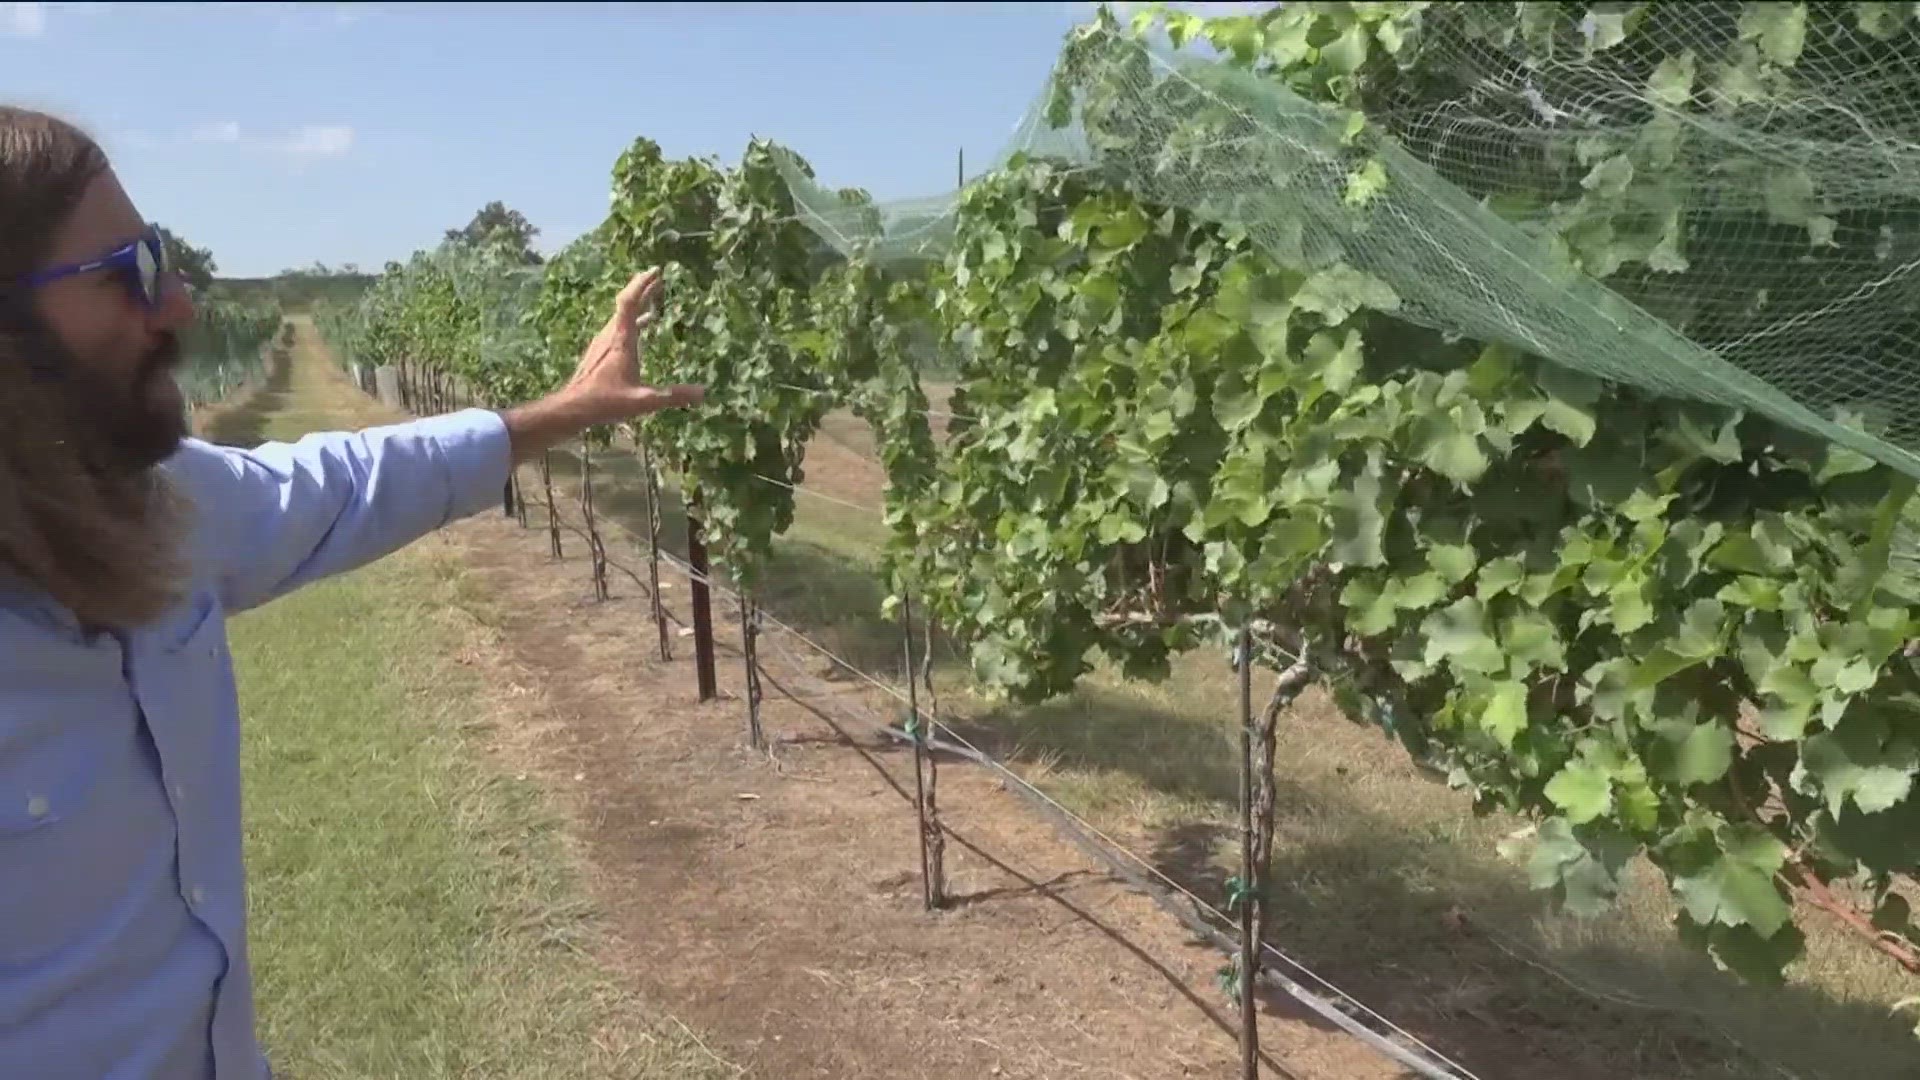 We've been seeing a record number of triple-digit temperatures, and that means vineyards are having to harvest grapes earlier.